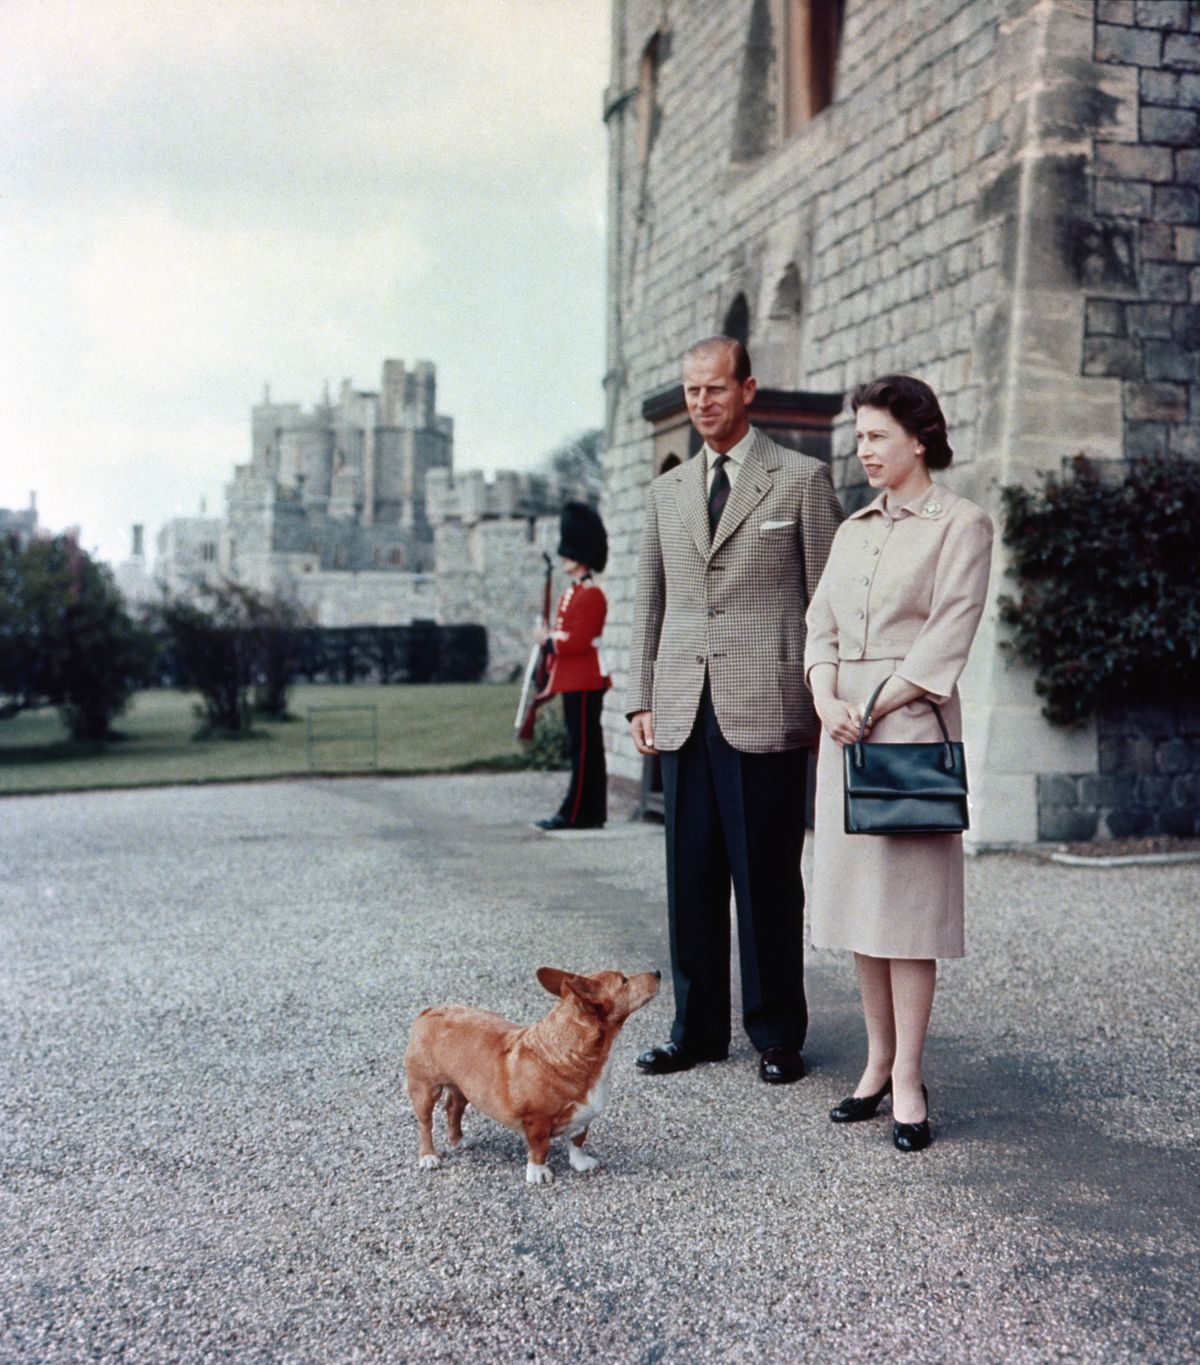 Queen Elizabeth II and Duke of Edinburgh at Windsor joined by Sugar, one of the Royal corgis. (Photo by PA Images via Getty Images)